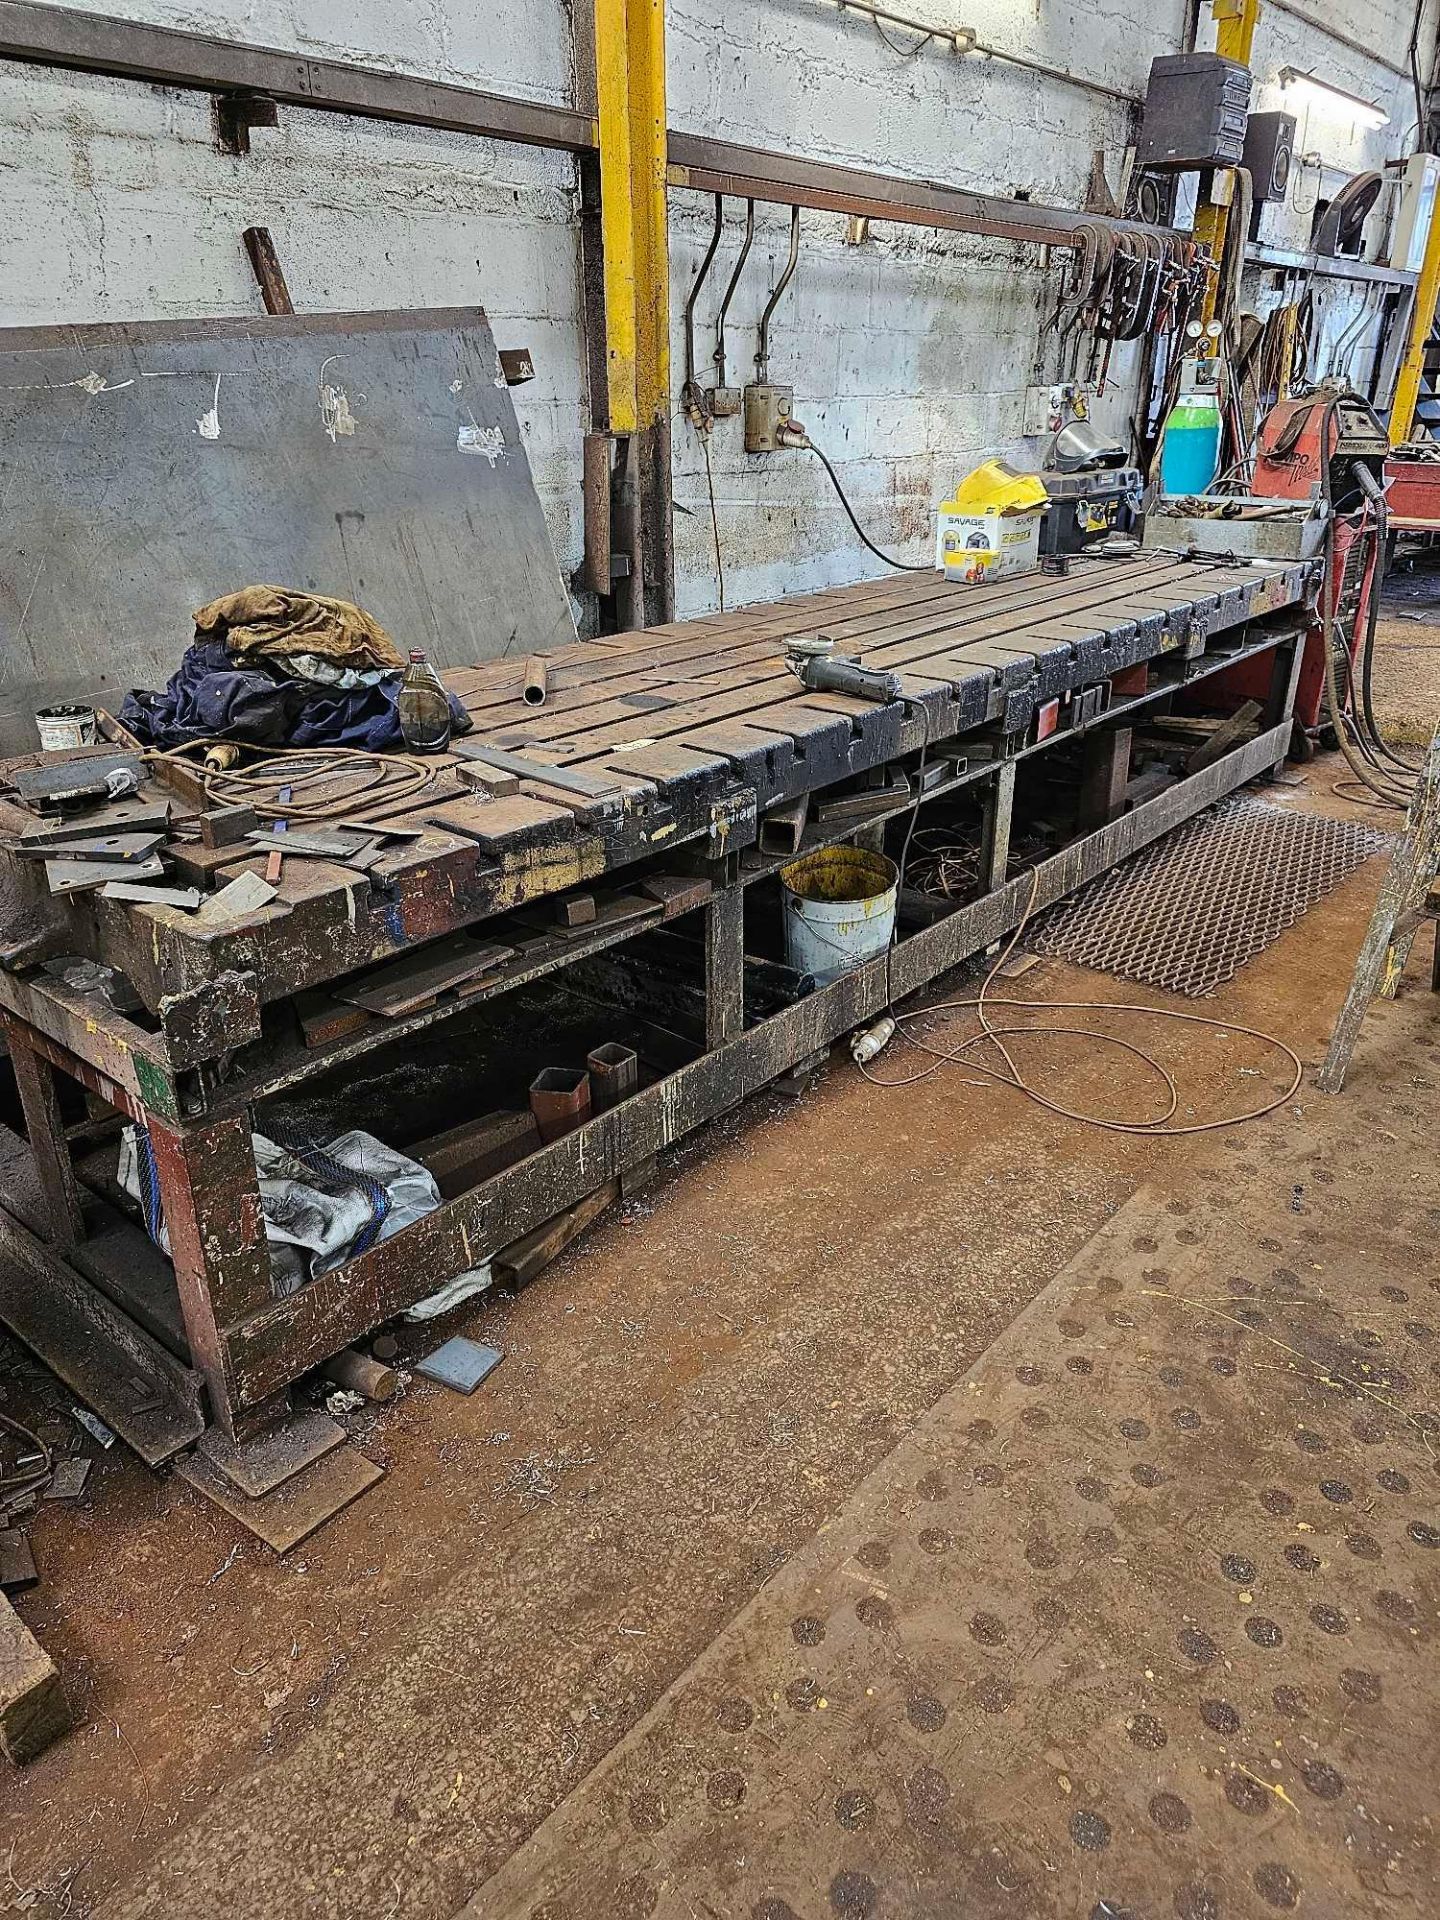 Cast Steel Engineers Marking Out Work Bench 477 x 105 x 86cm Weight 3900kg